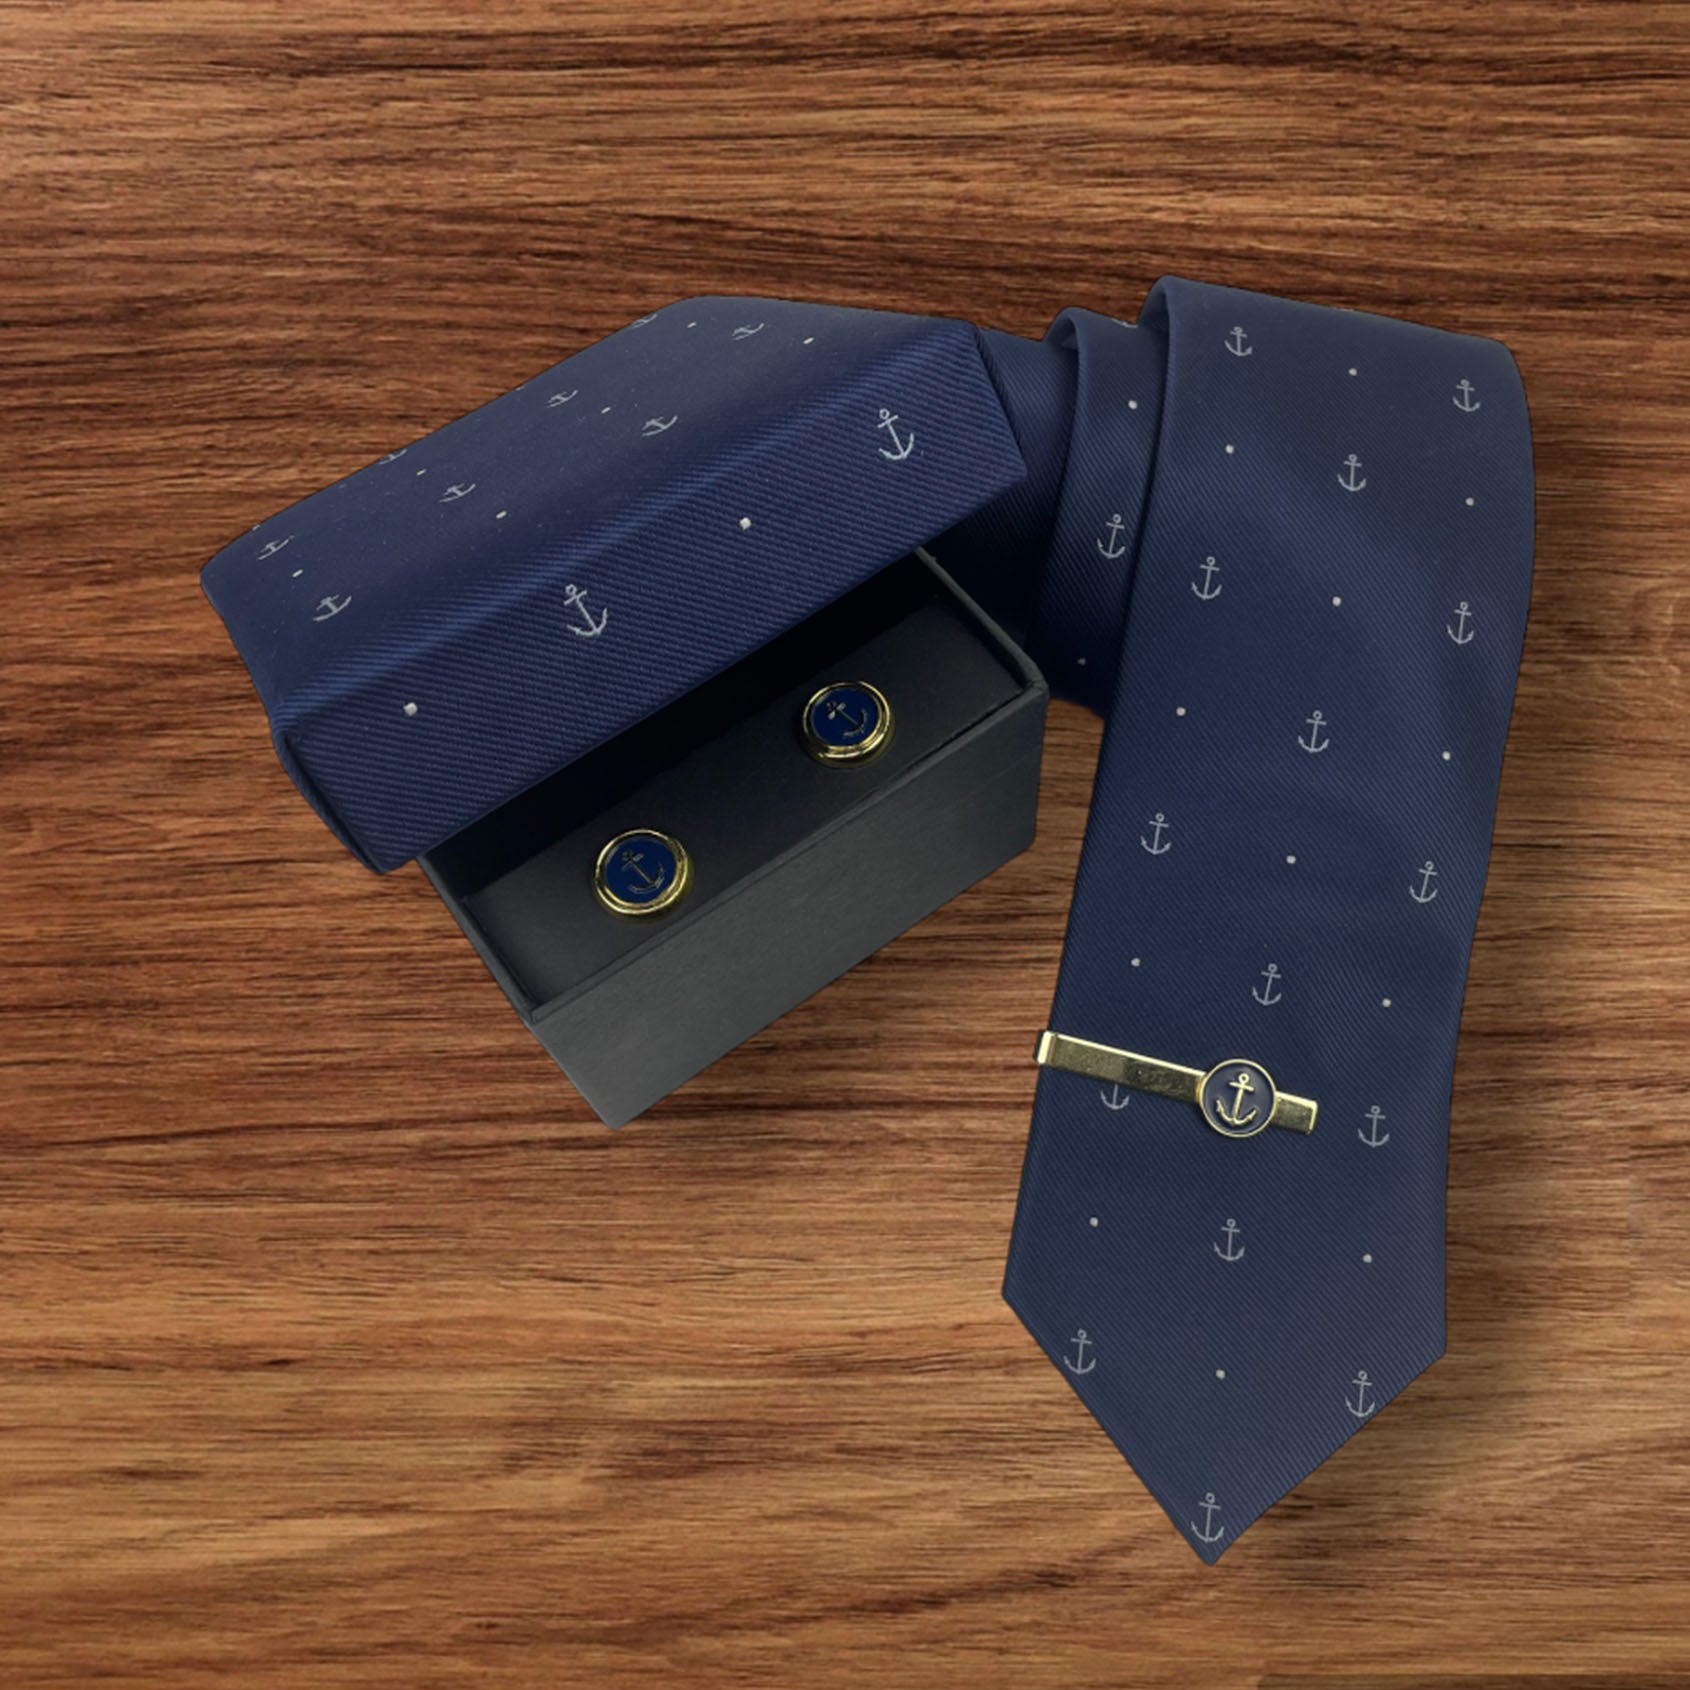 Navy gift set with tie pin, tie and cufflinks